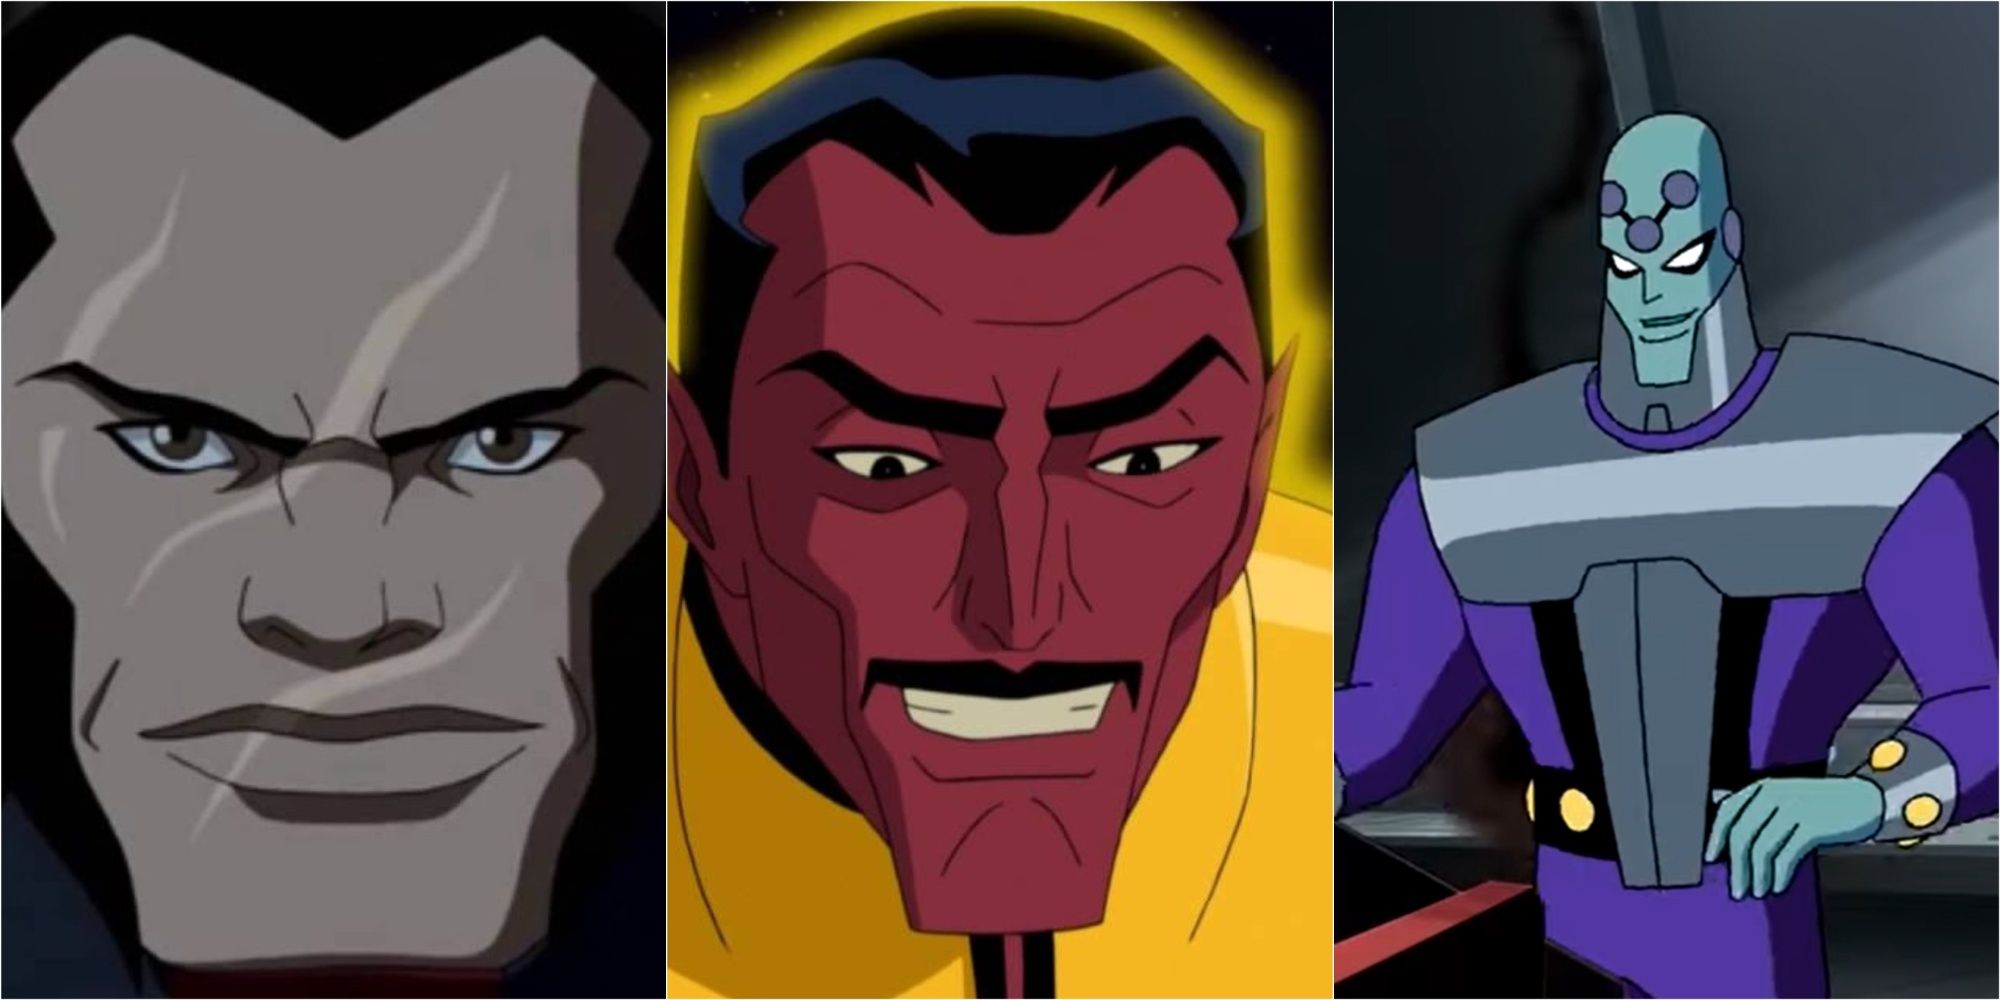 A feature image of Vandal Savage, Sinestro, and Brainiac